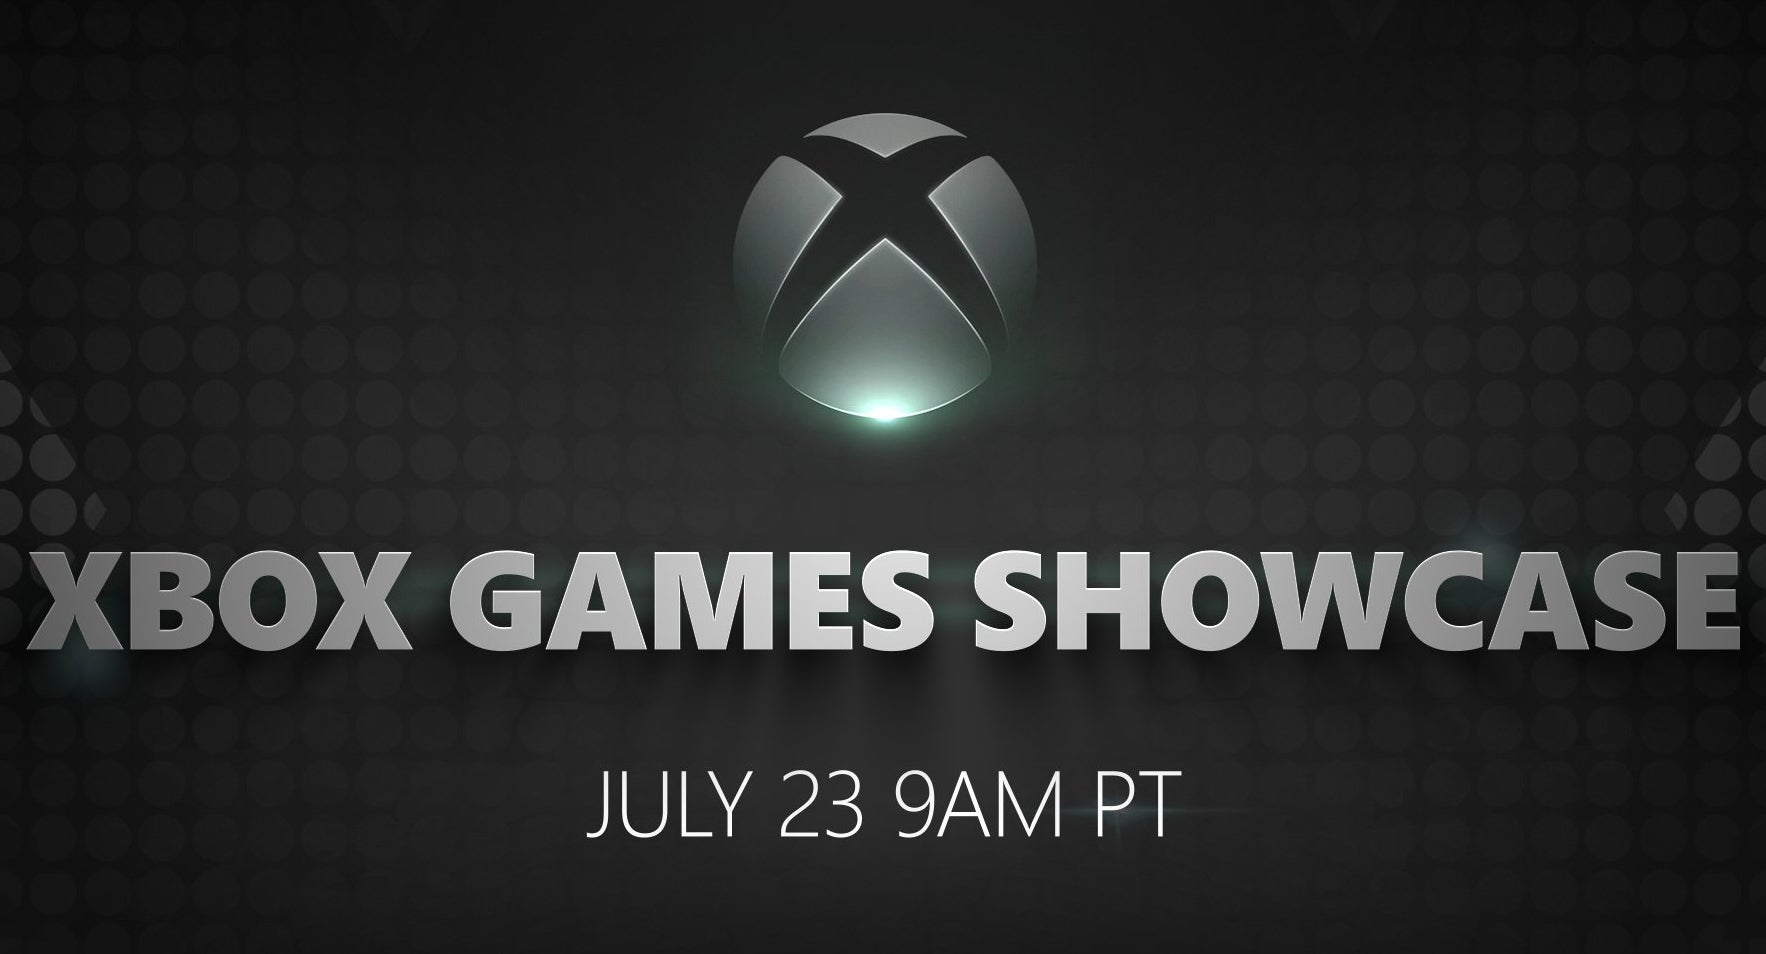 Image for Watch today’s Xbox Games Showcase here for Halo Infinite and hopefully some Fable